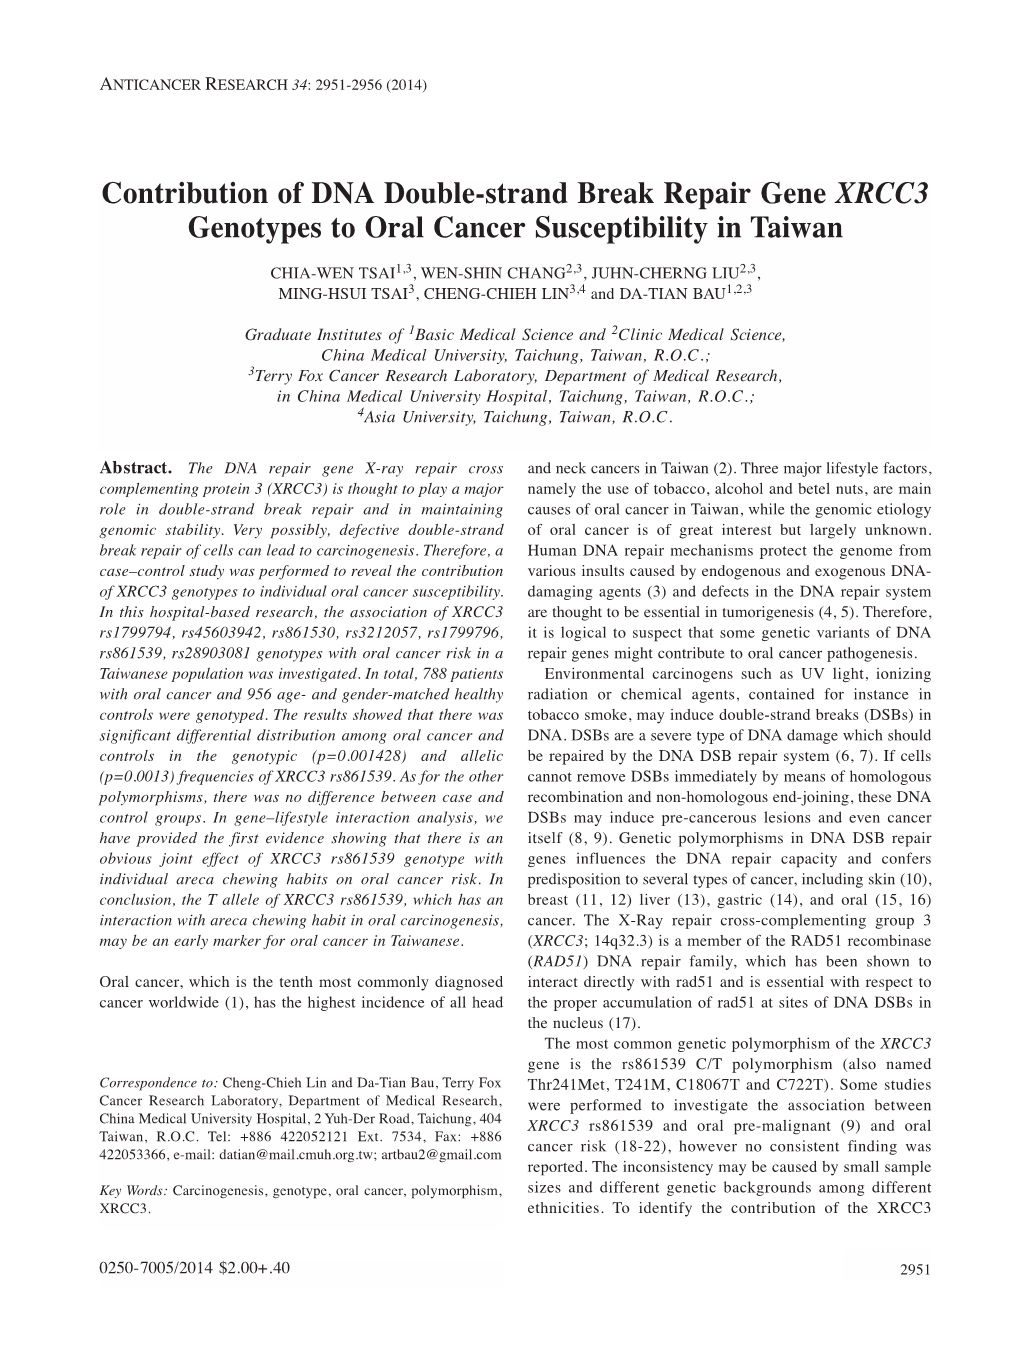 Contribution of DNA Double-Strand Break Repair Gene XRCC3 Genotypes to Oral Cancer Susceptibility in Taiwan